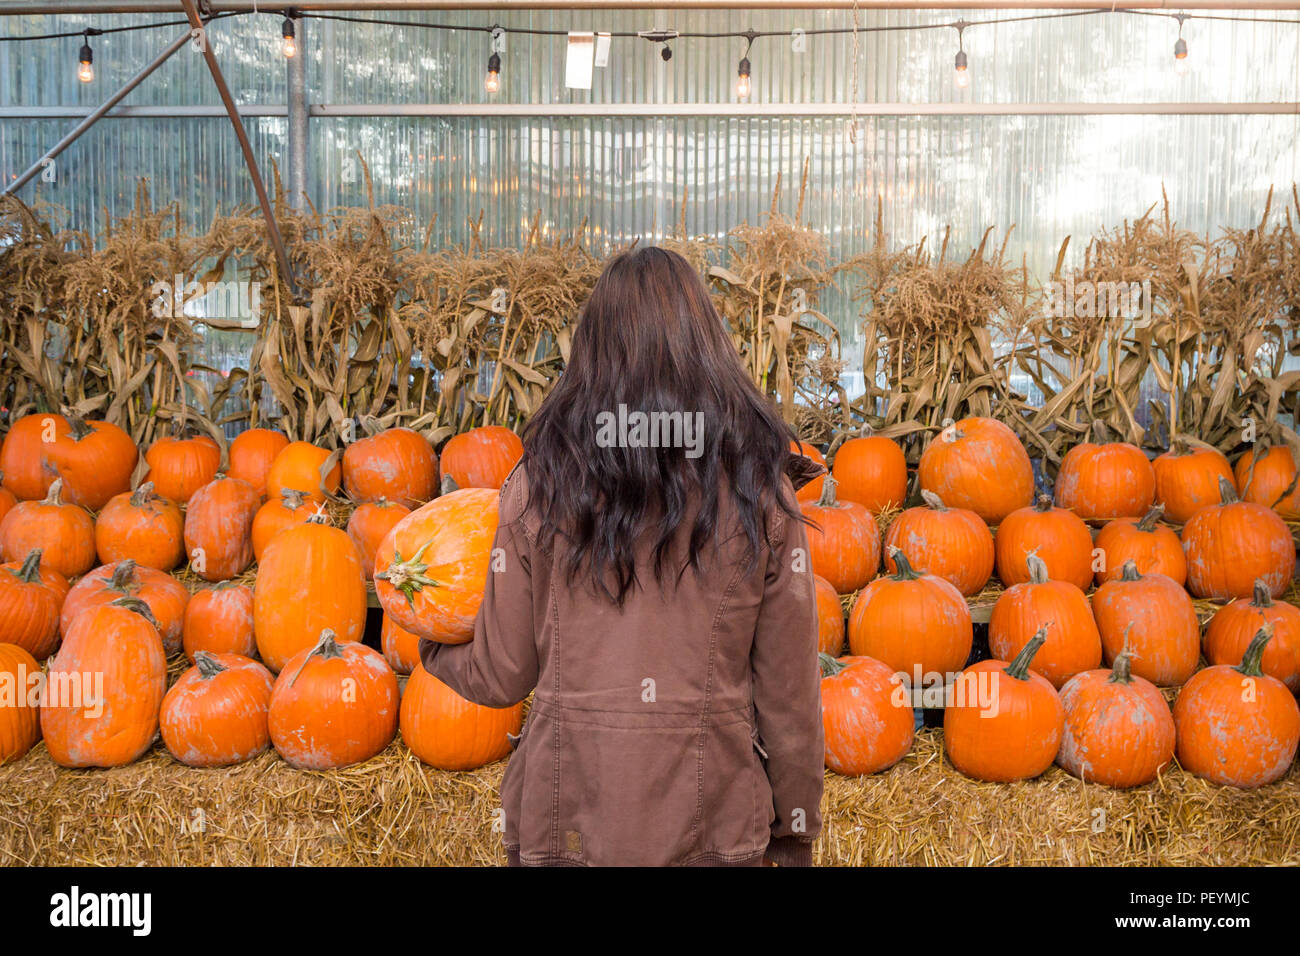 A young brunette woman holding a pumpkin in front of a row of pumpkins on a farm. Stock Photo